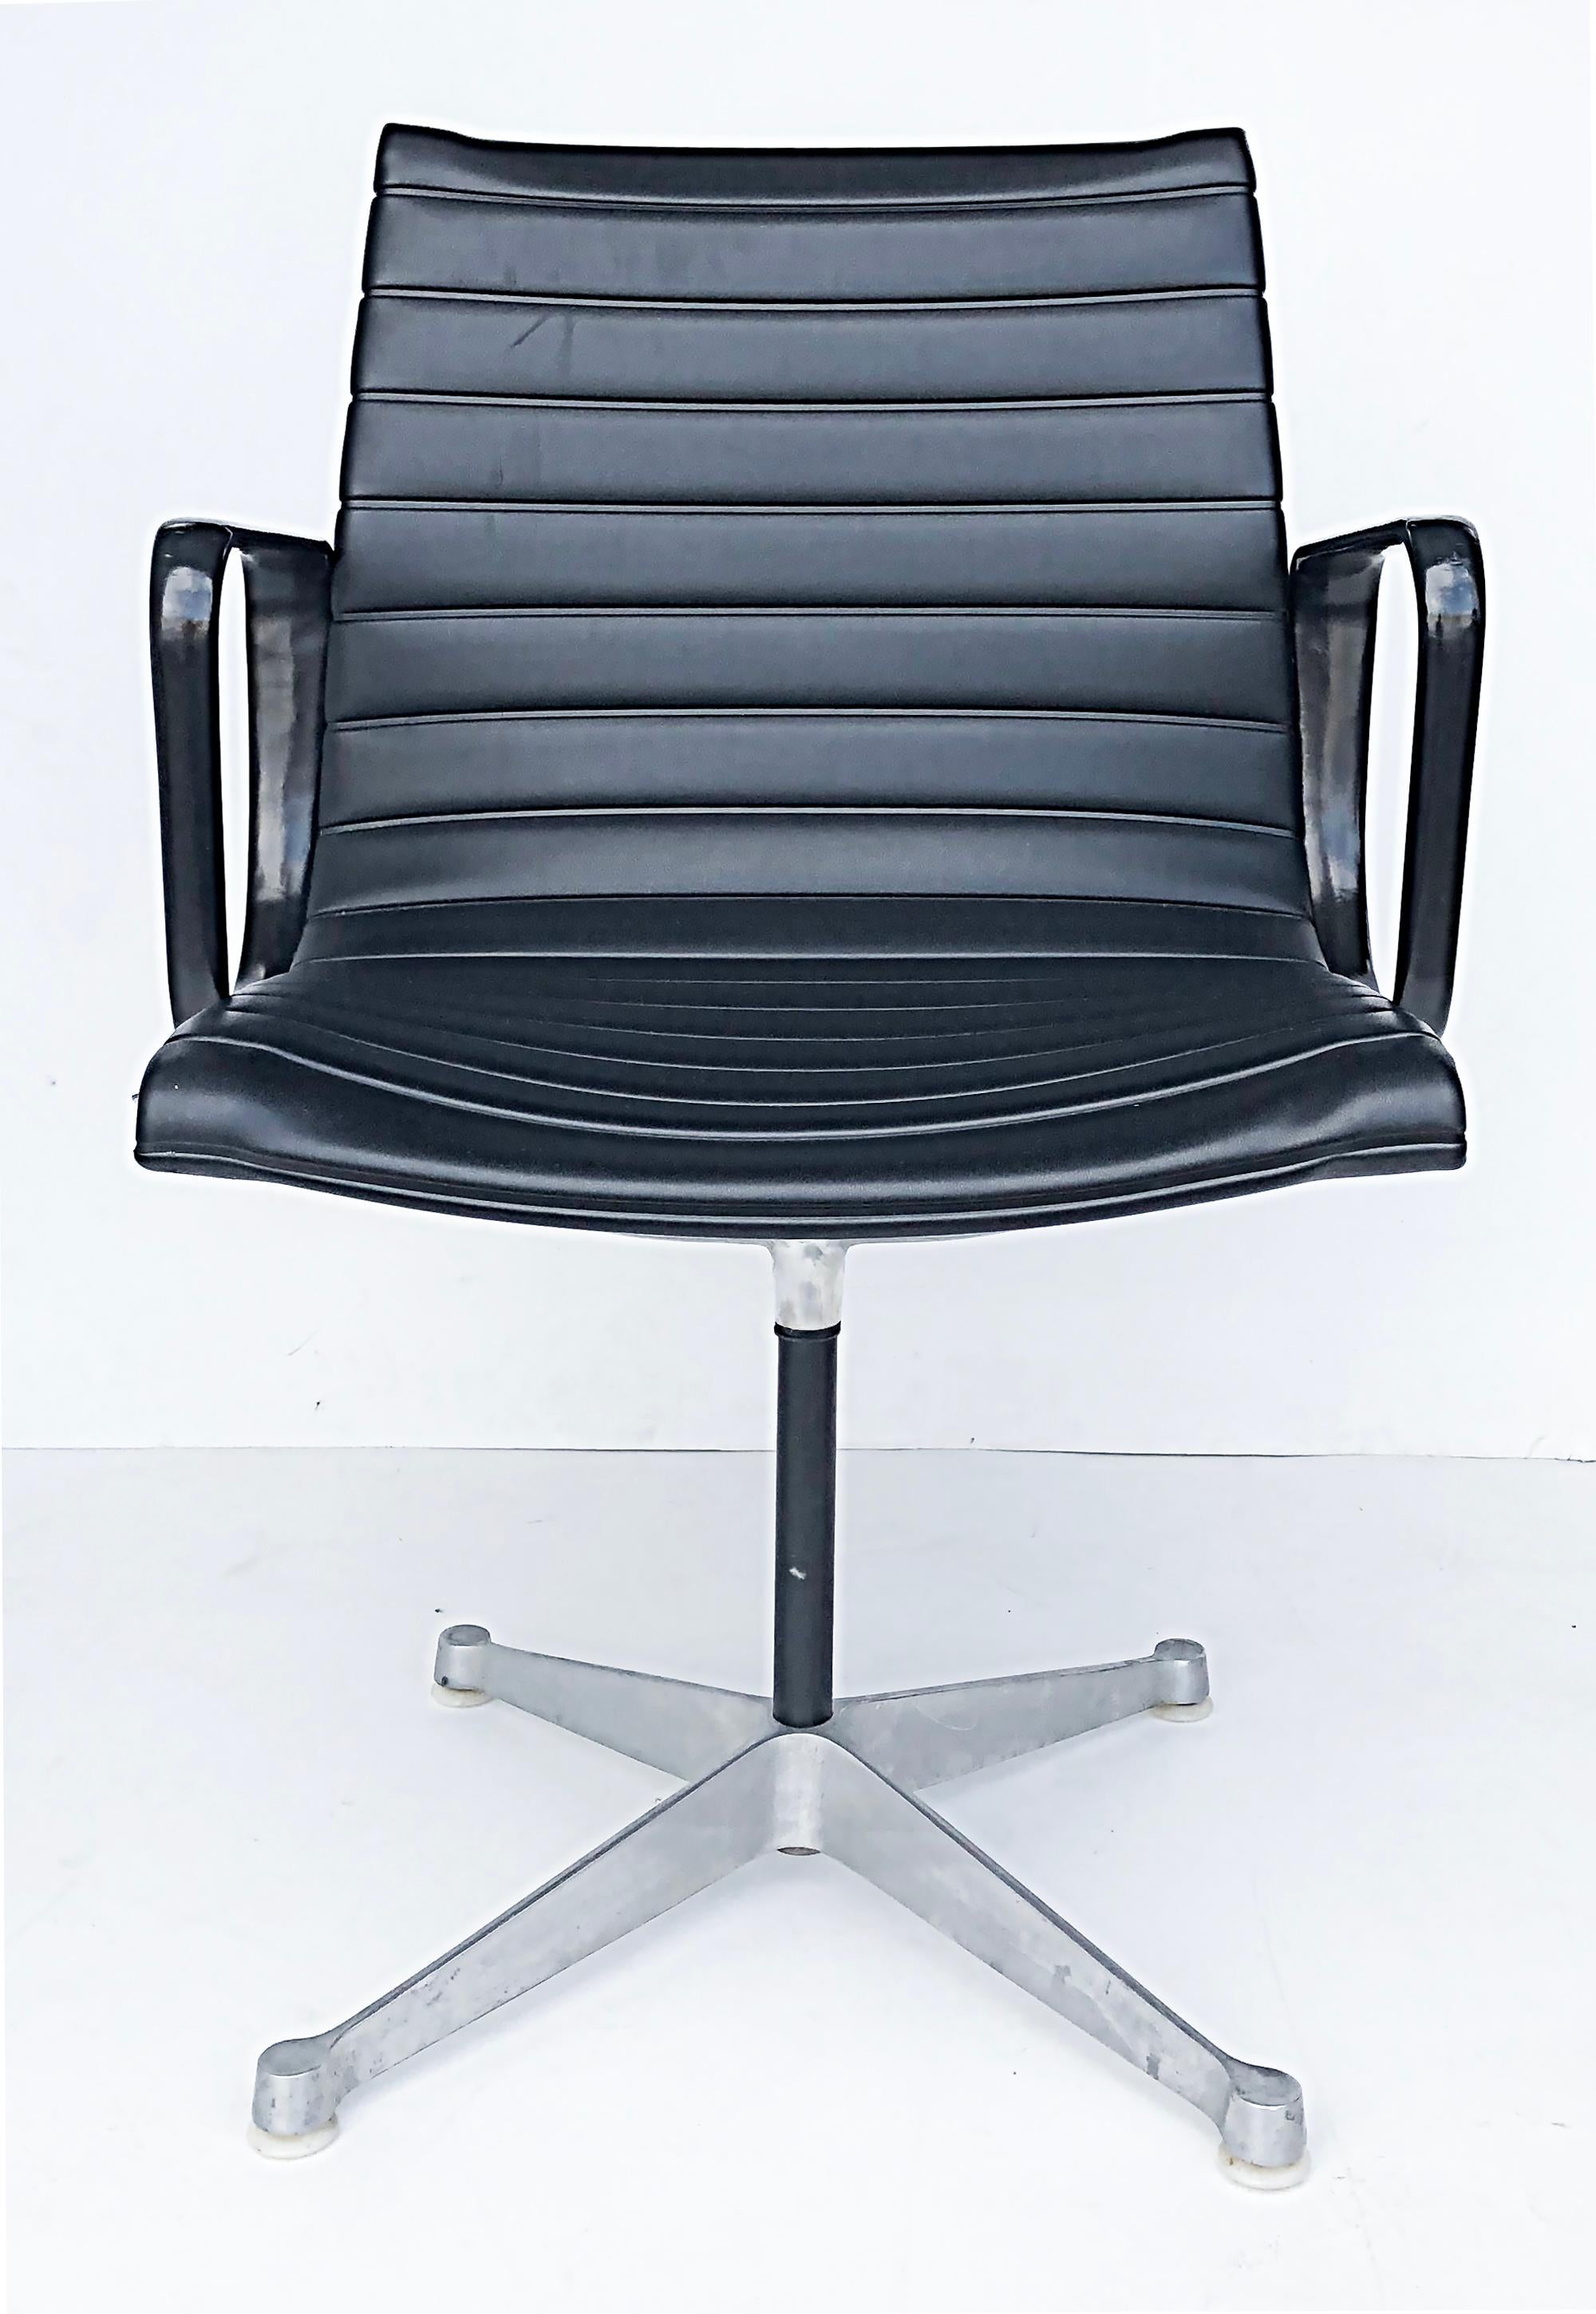 Eames Herman Miller Aluminum Group EA108 Swivel chairs, leather

Offered for sale is a pair of Herman Miller Charles and Ray Eames Aluminum Group EA108 leather swivel chairs. Originally designed by Charles and Ray Eames in 1958, the EA 108 chair